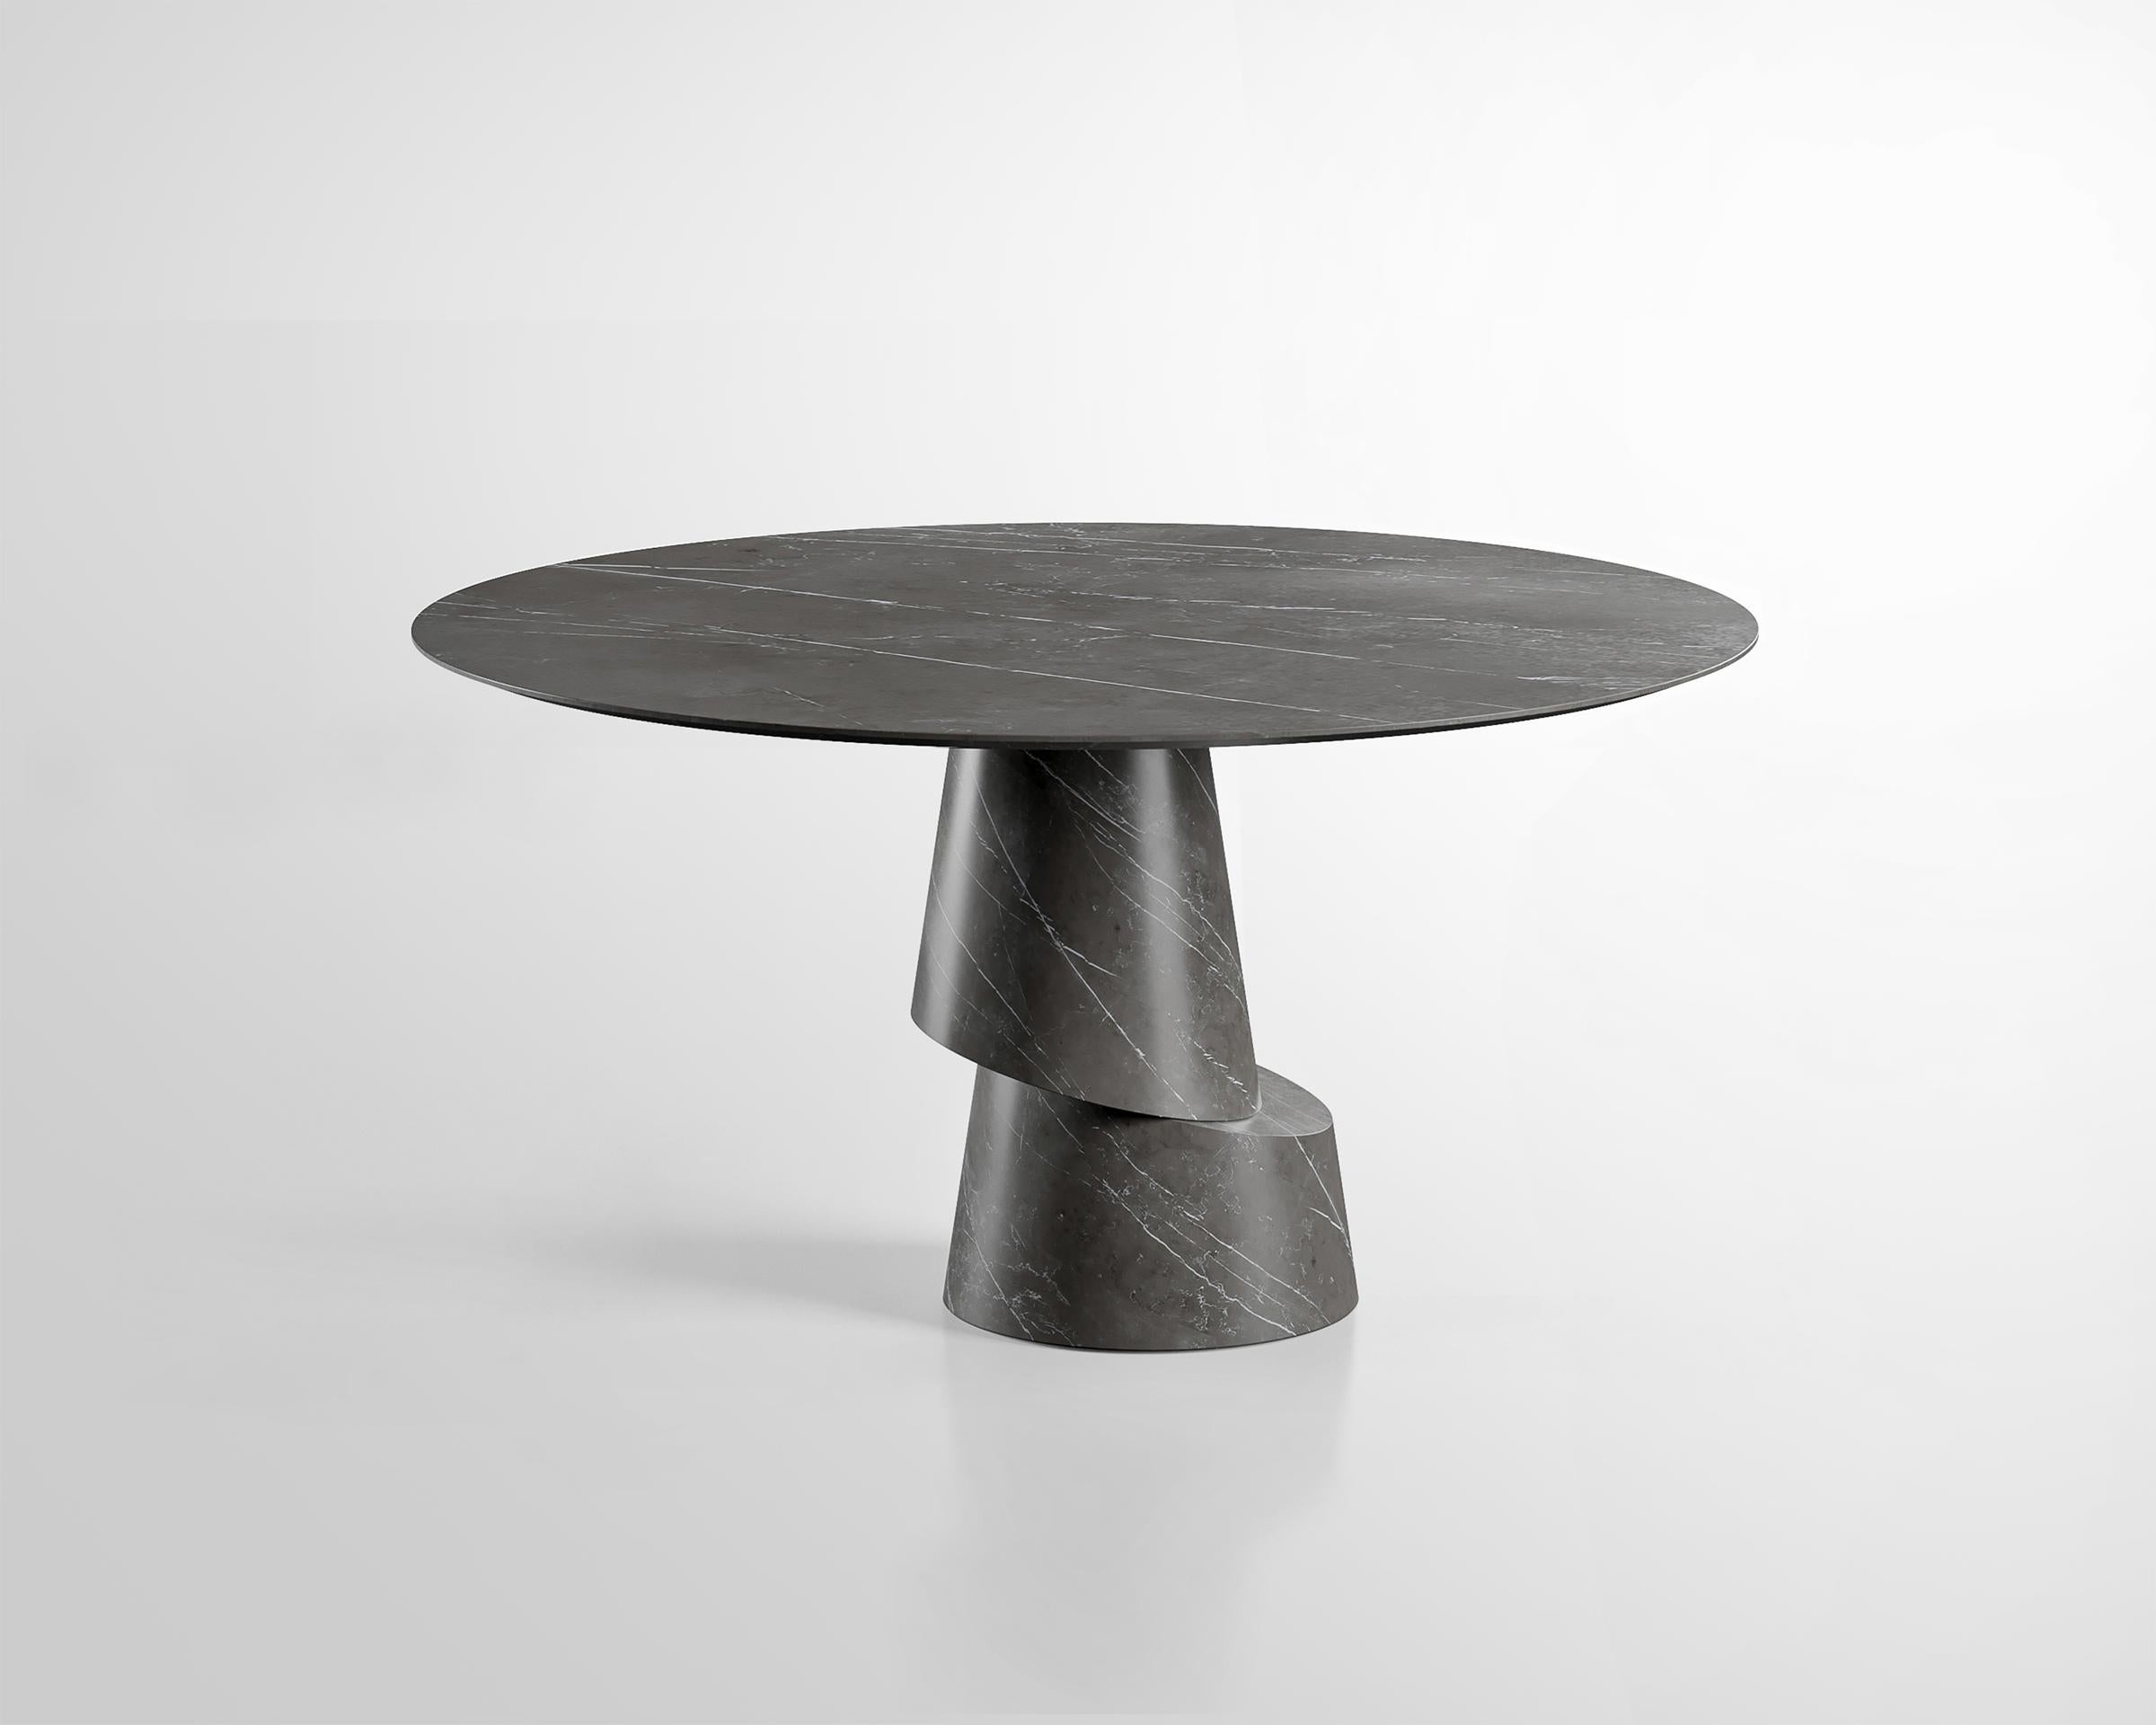 Slice Graphite Stone Dining Table by Etamorph
Dimensions: Ø 140 x H 45 cm.
Materials: Graphite stone.

Available in Graphite, White Carrara, Nuvolato and Jungle marble options. Other stones on demand. Please contact us. 

ETAMORPH is a NYC-based